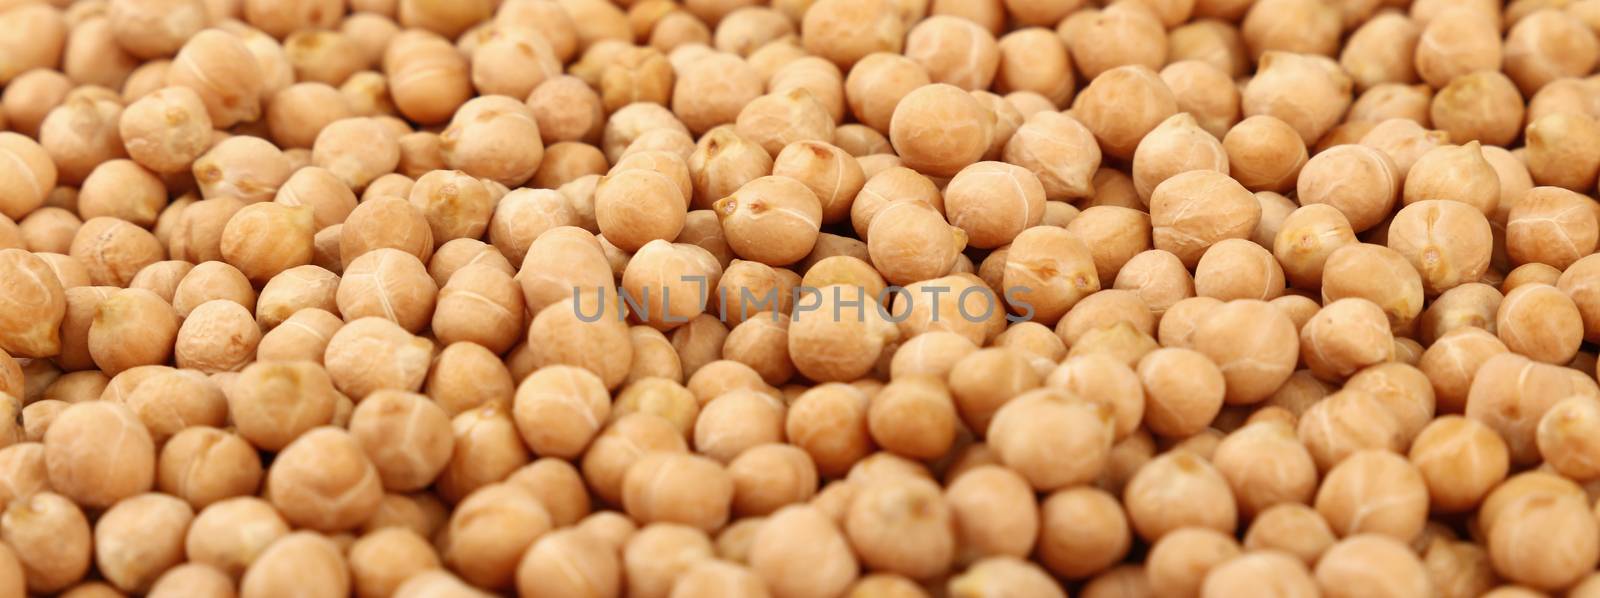 Dried chickpea beans at retail market display, close up pattern background, low angle view